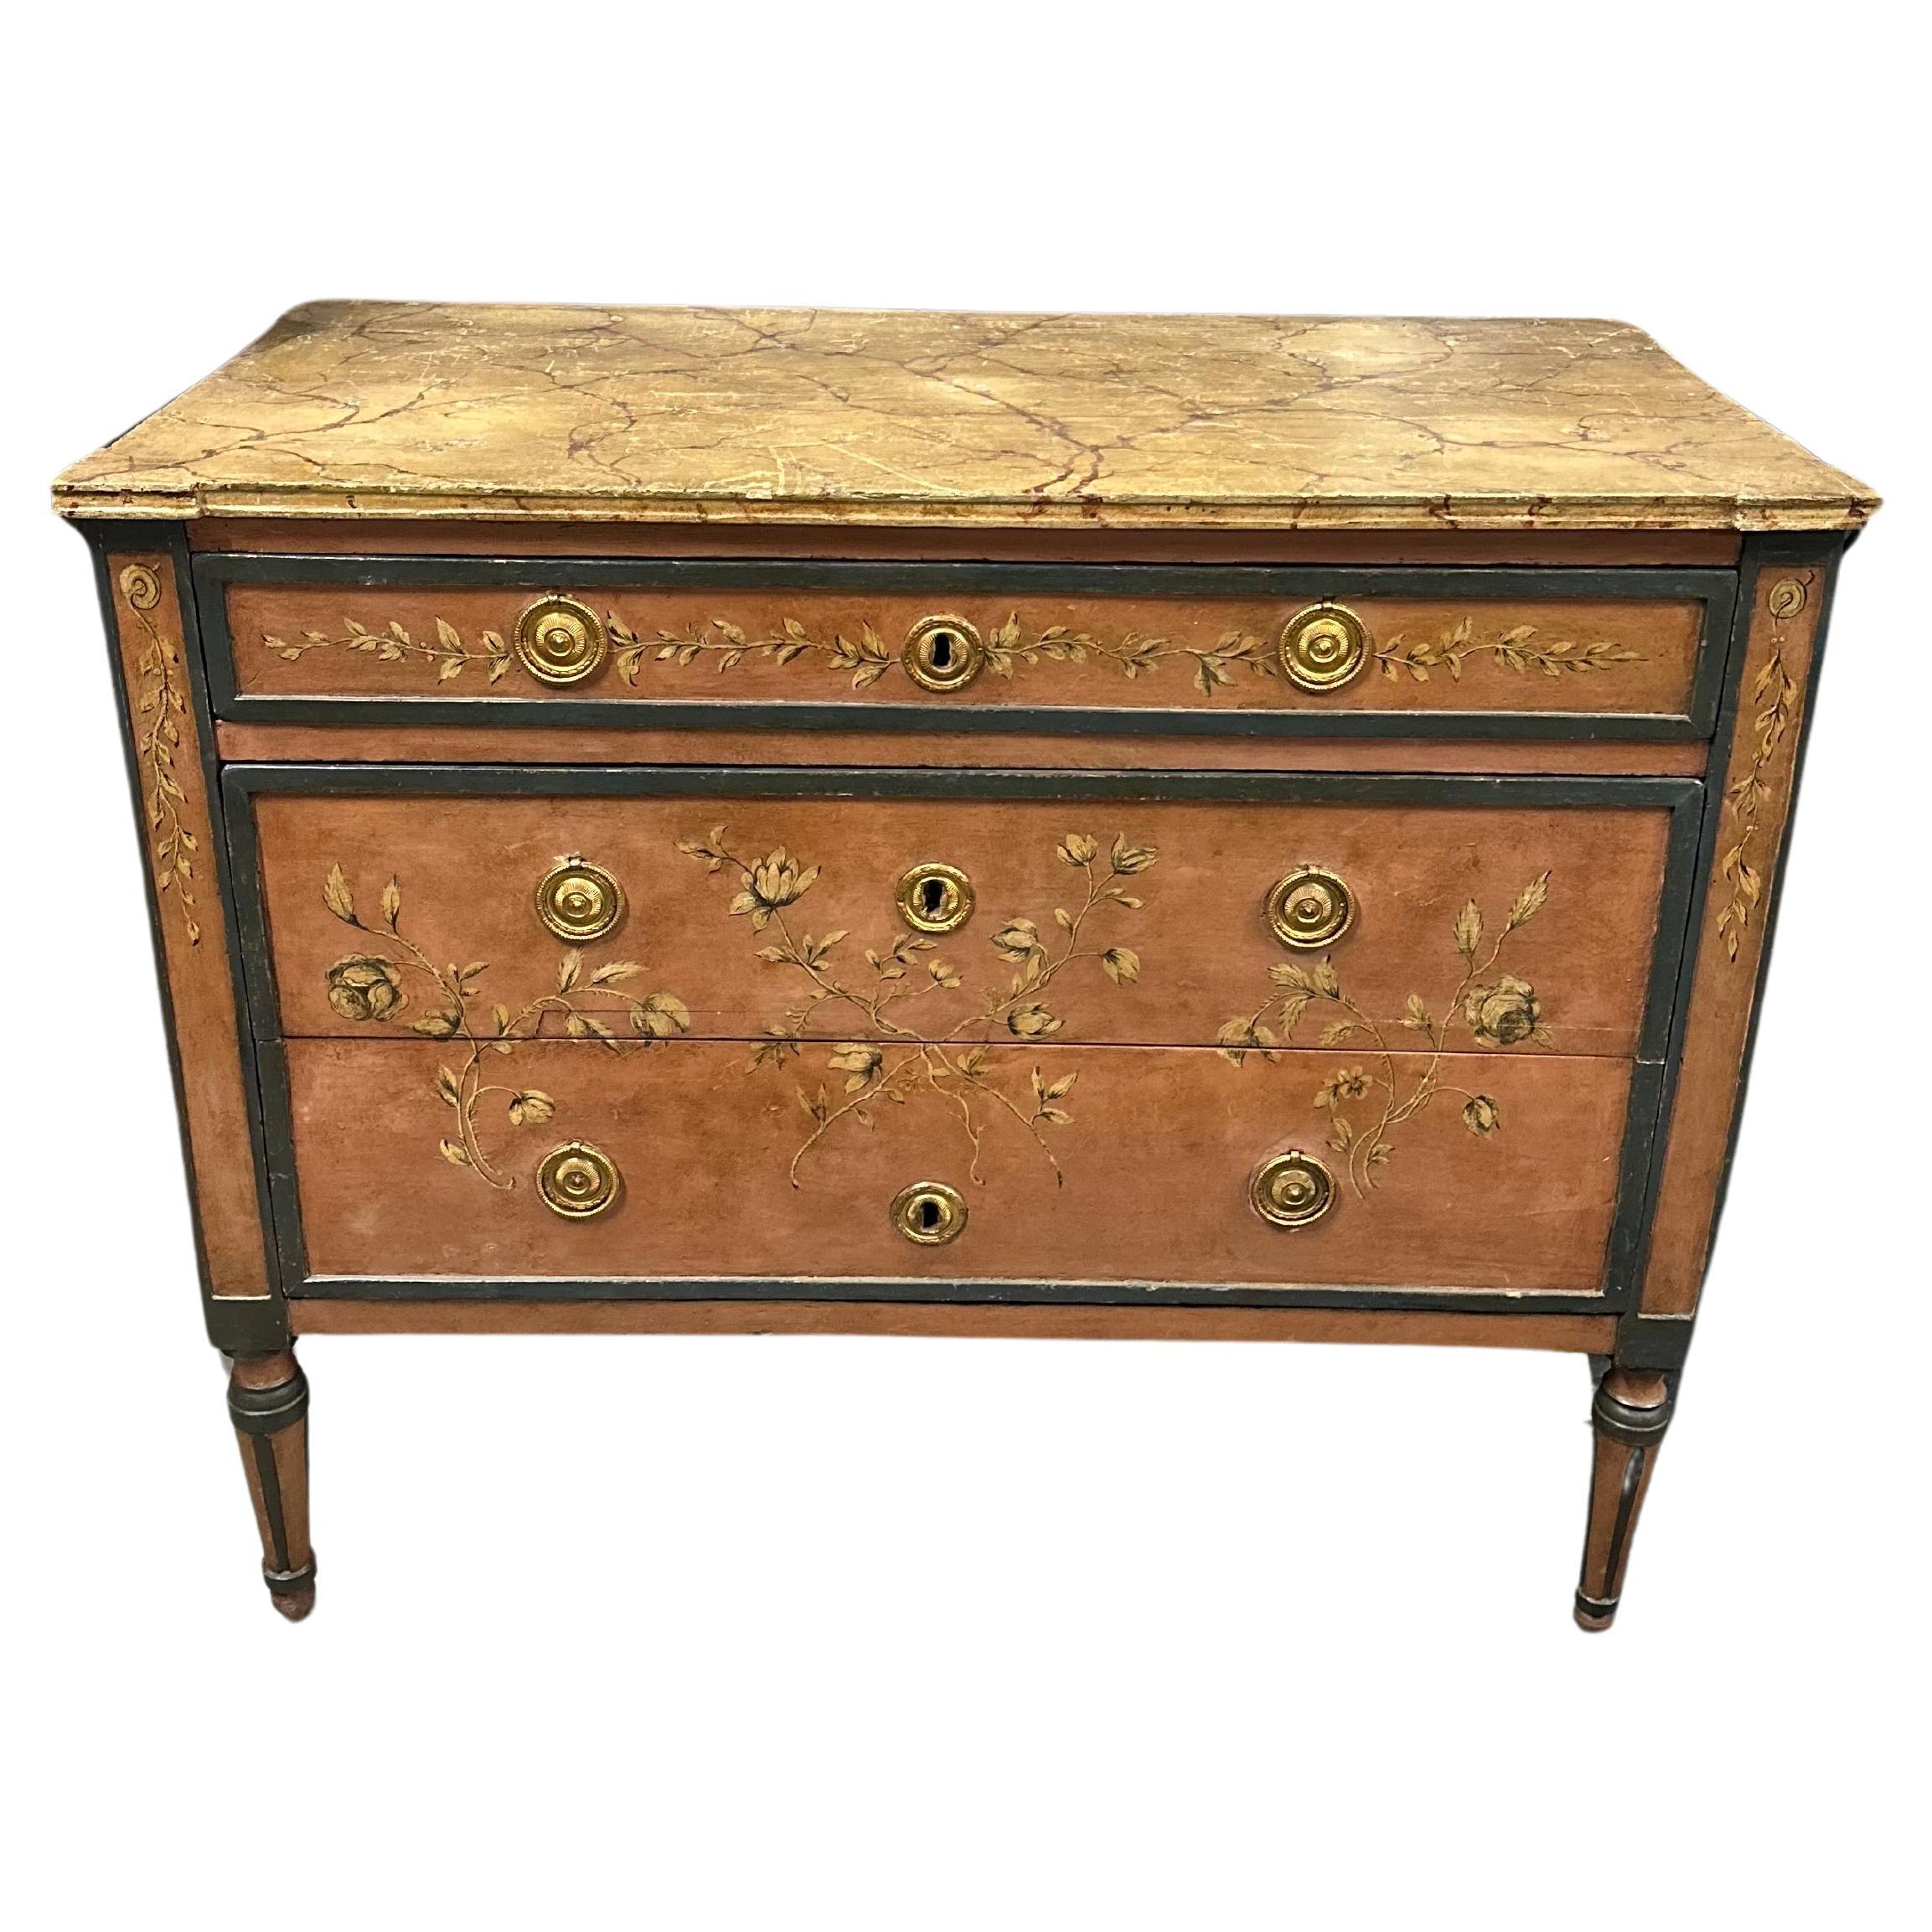 Early 20th Century Painted Italian Neoclassical Style Three Drawer Commode For Sale